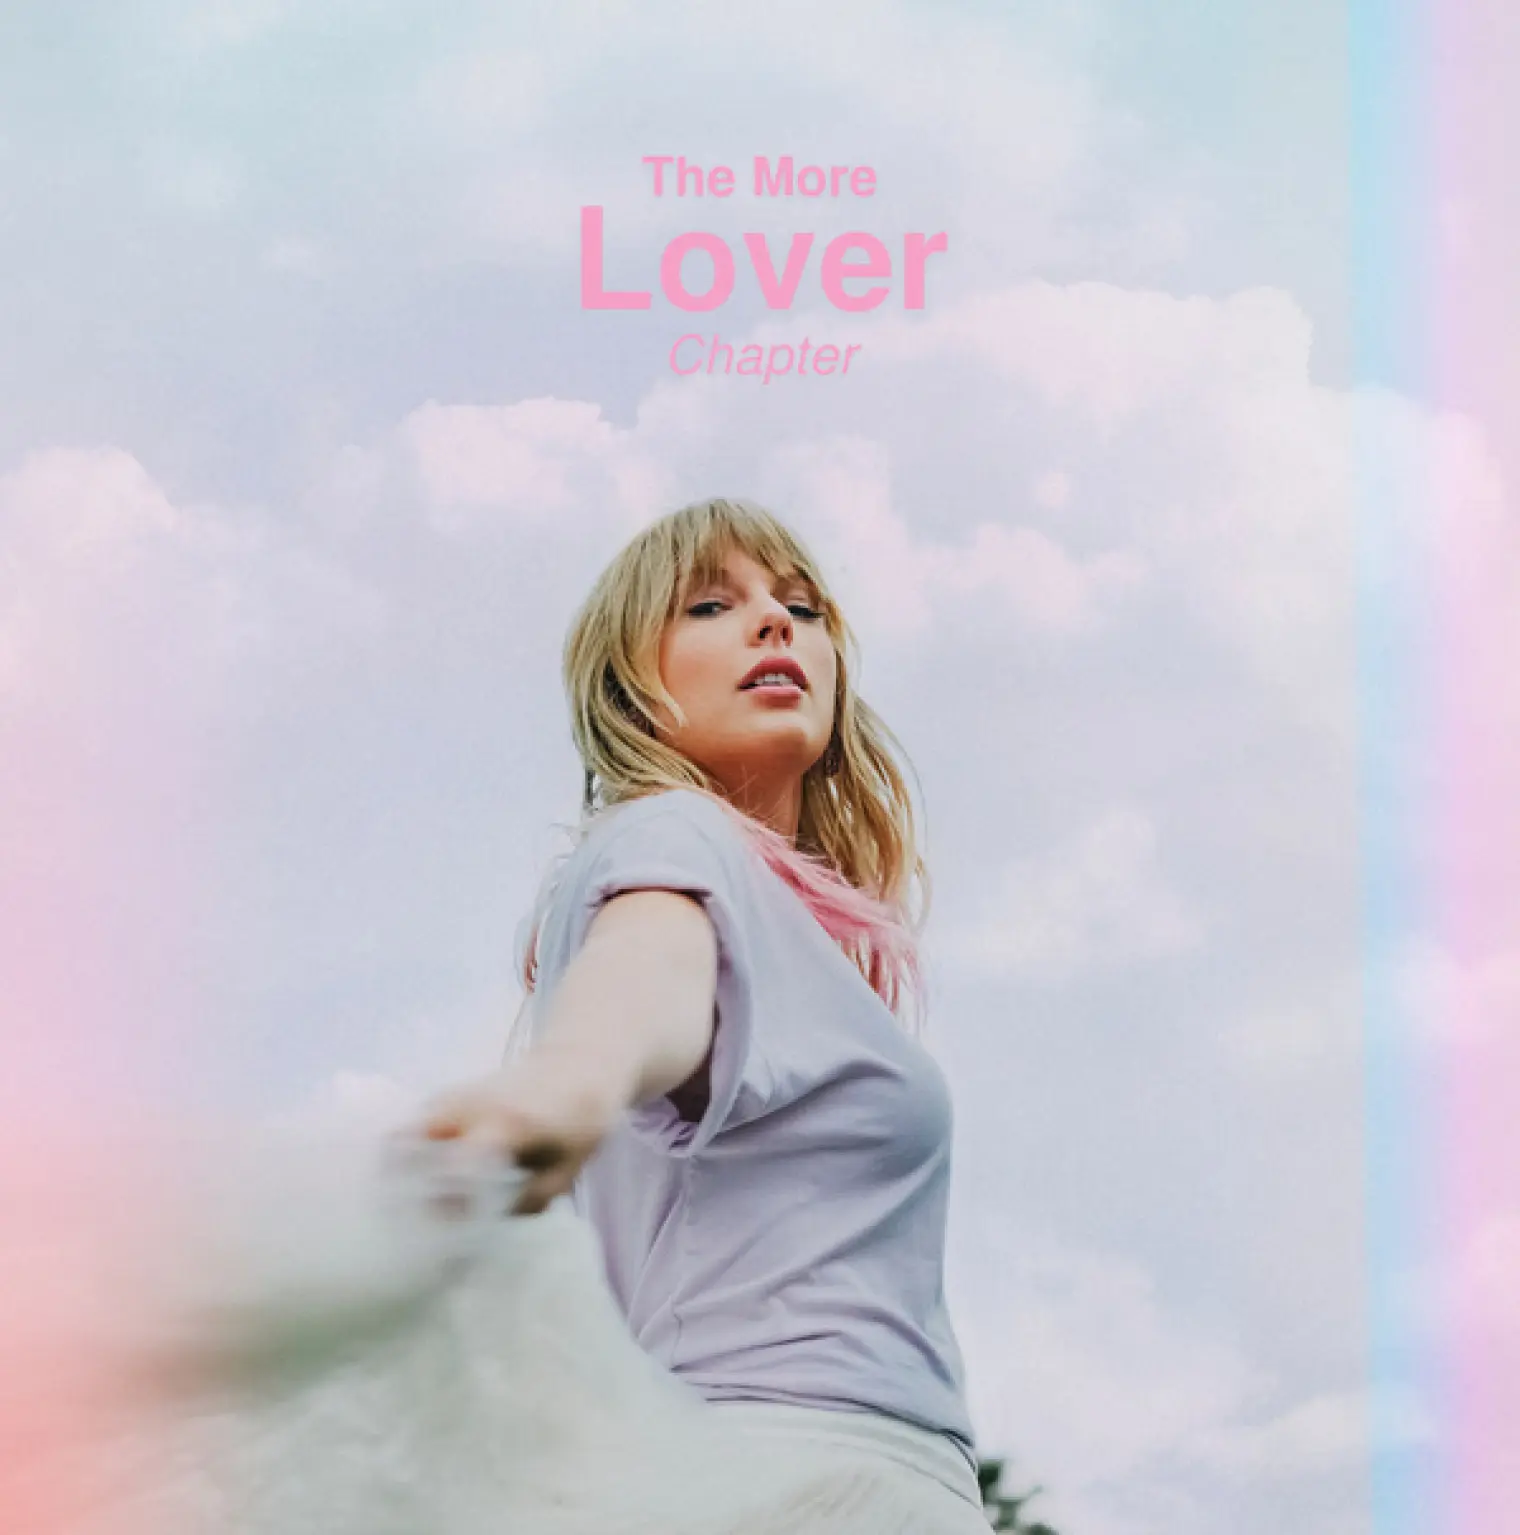 The More Lover Chapter -  Taylor Swift 